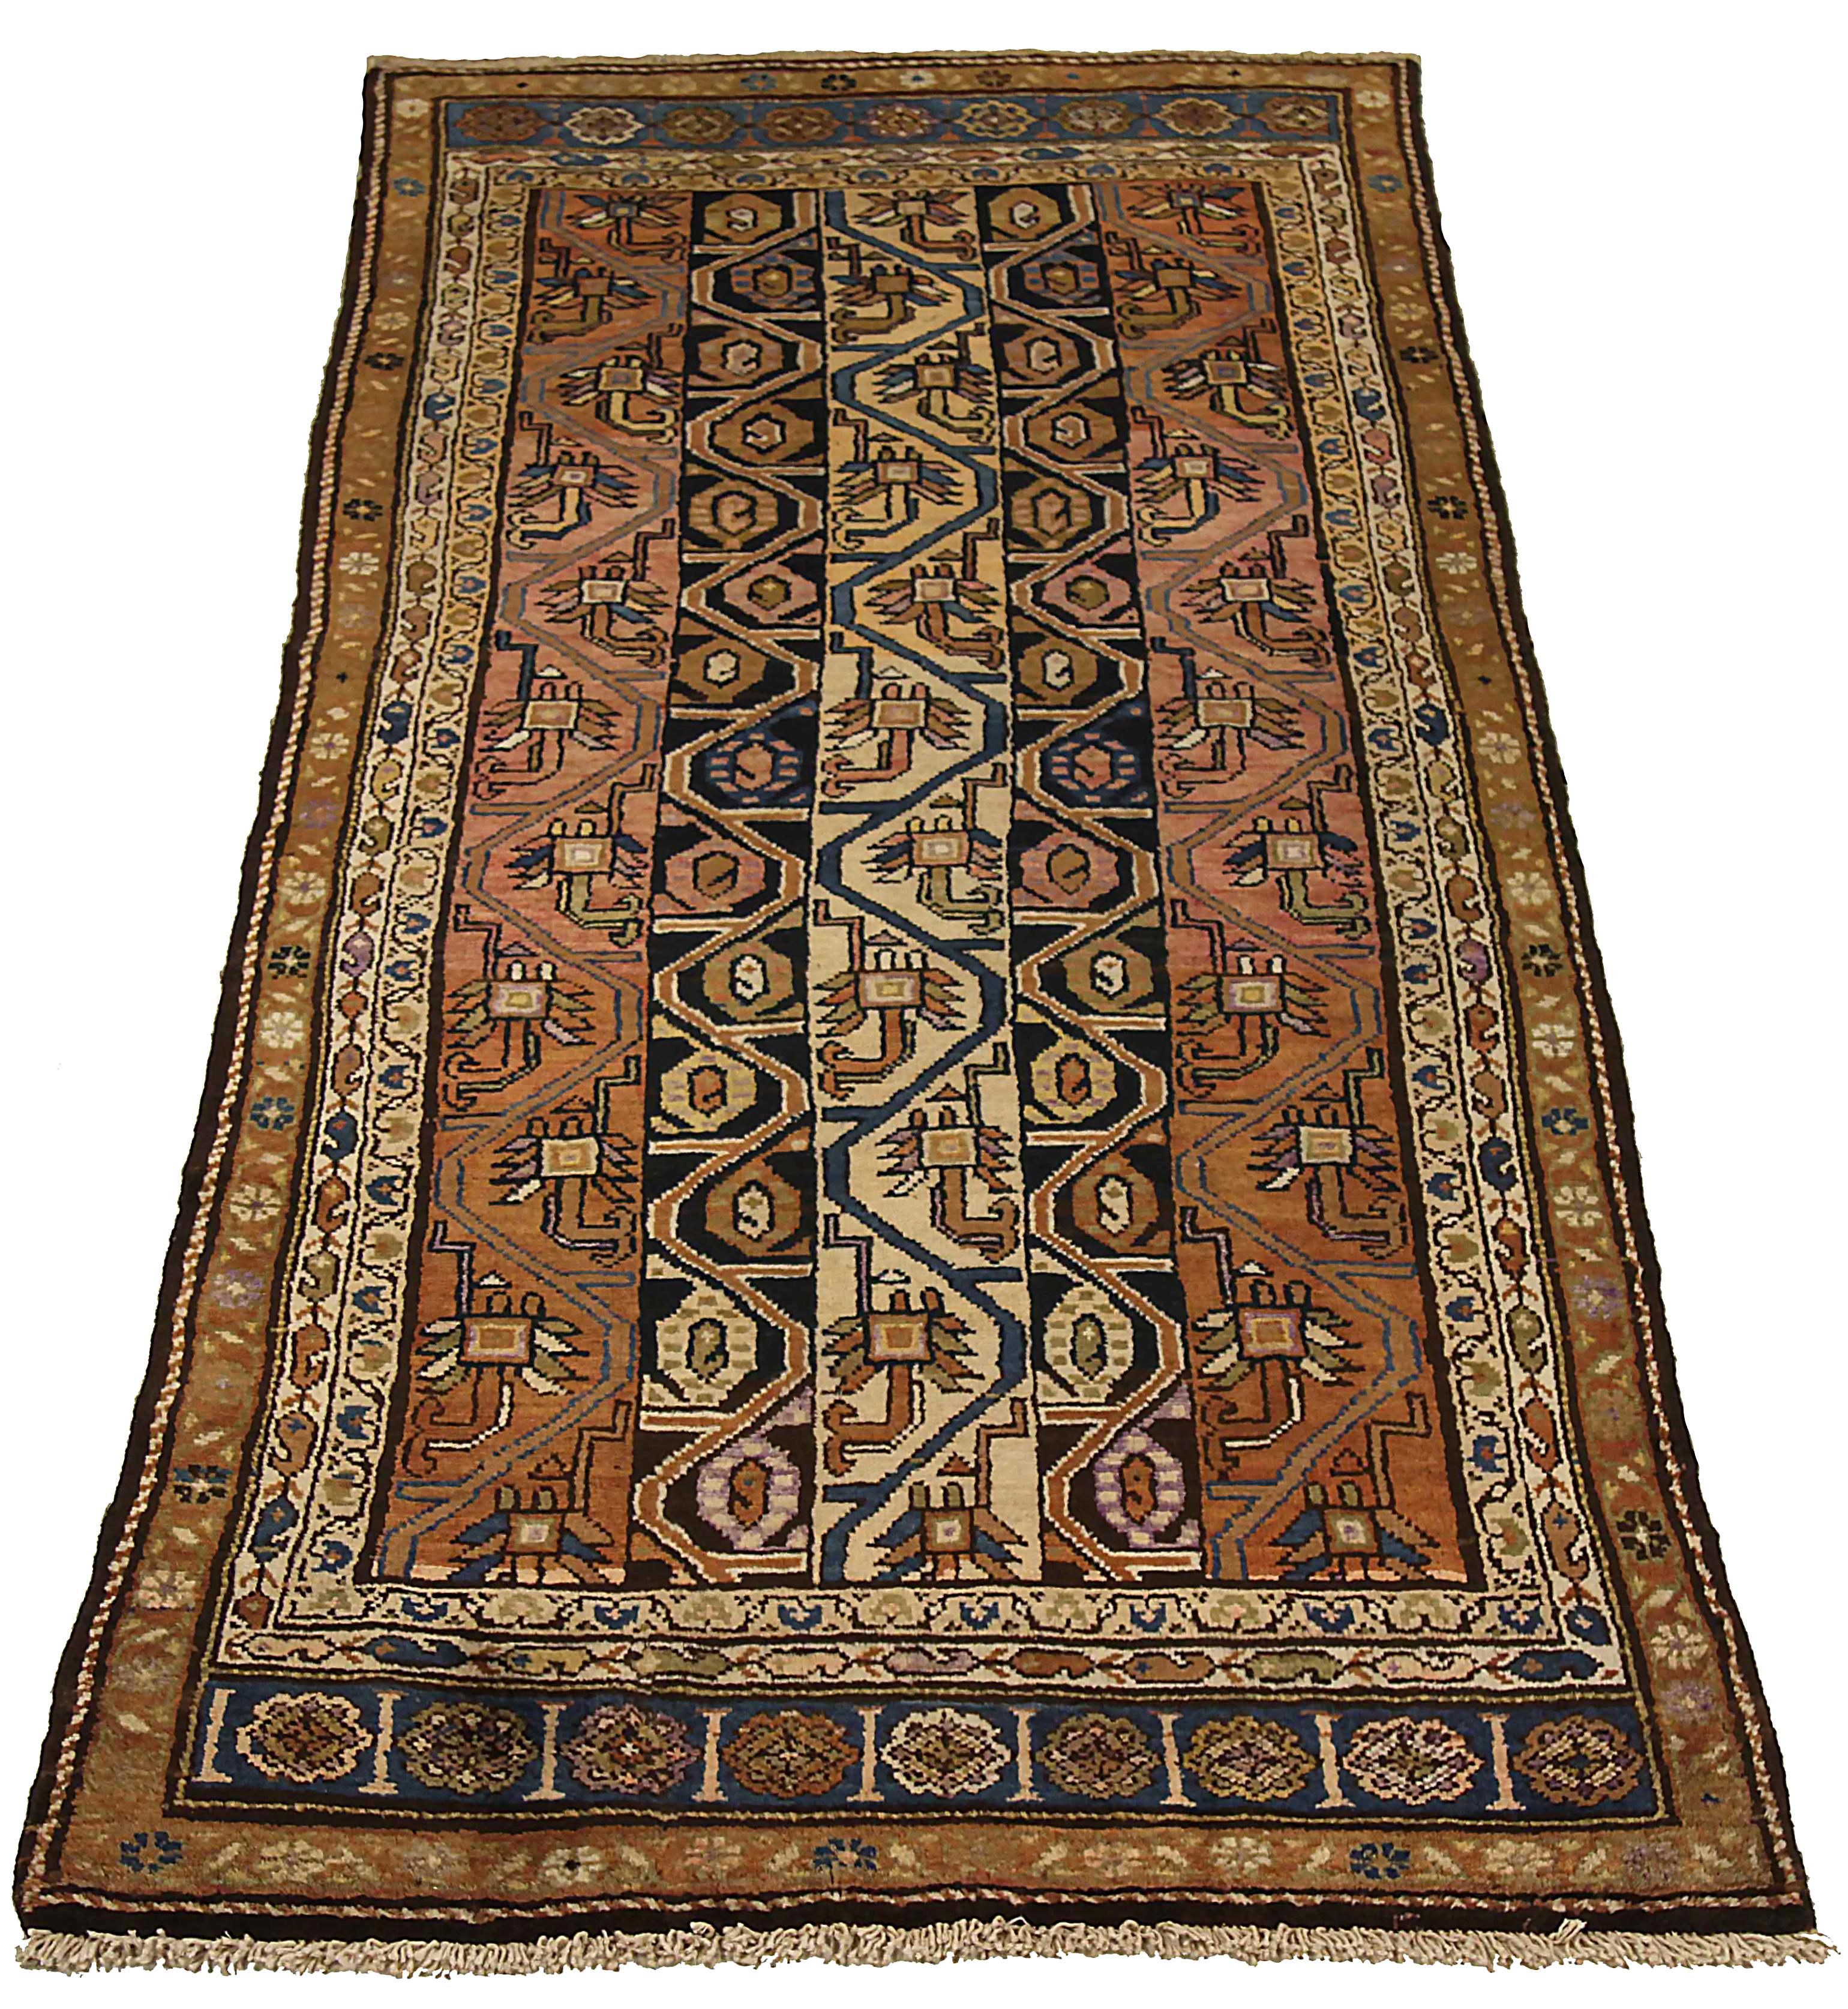 Antique Persian runner rug handwoven from the finest sheep’s wool. It’s colored with all-natural vegetable dyes that are safe for humans and pets. It’s a traditional Zanjan design handwoven by expert artisans. It’s a lovely runner rug that can be